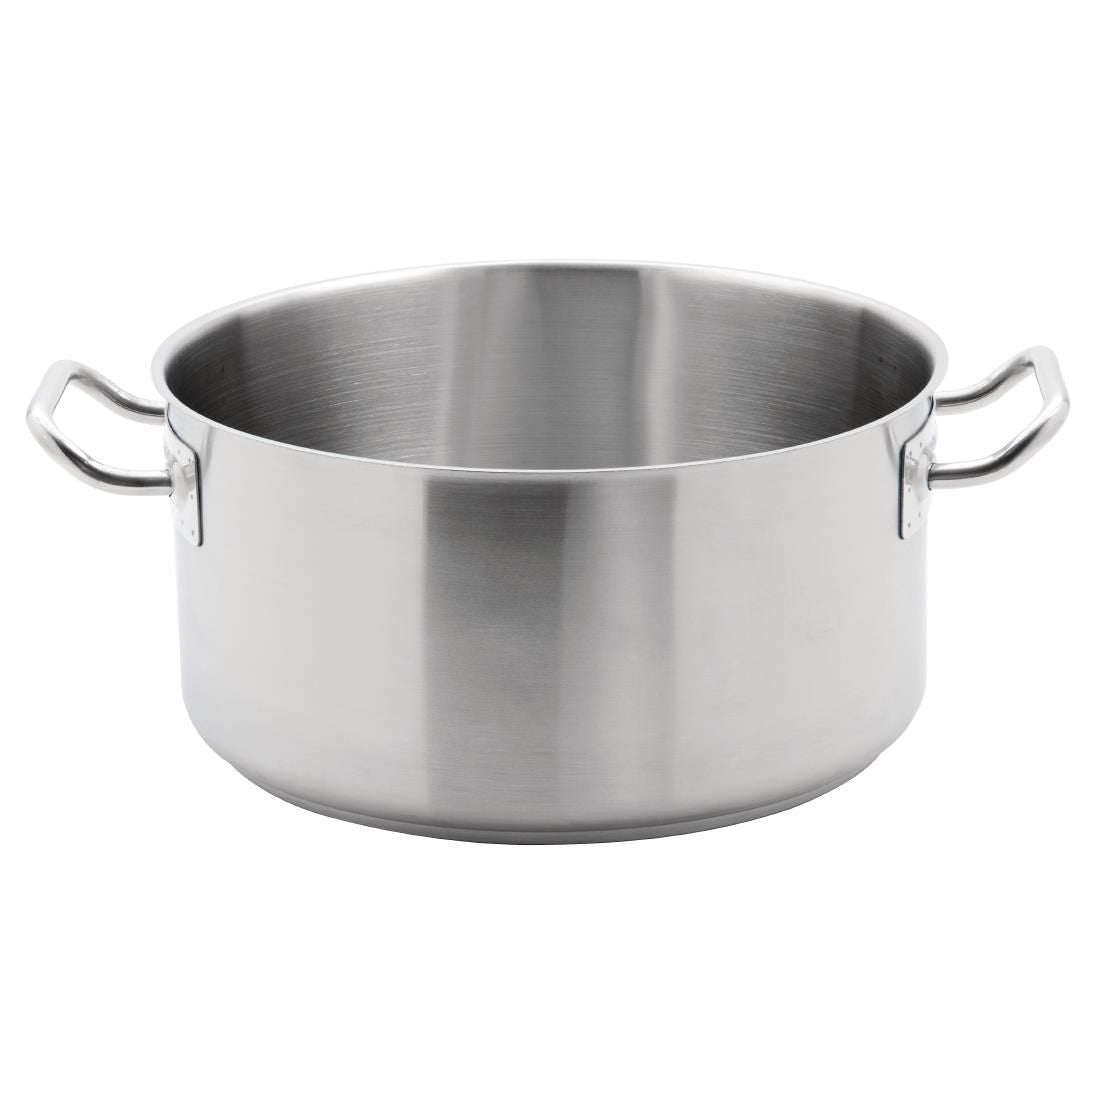 M942 Vogue Stainless Steel Stew pan 12.5Ltr